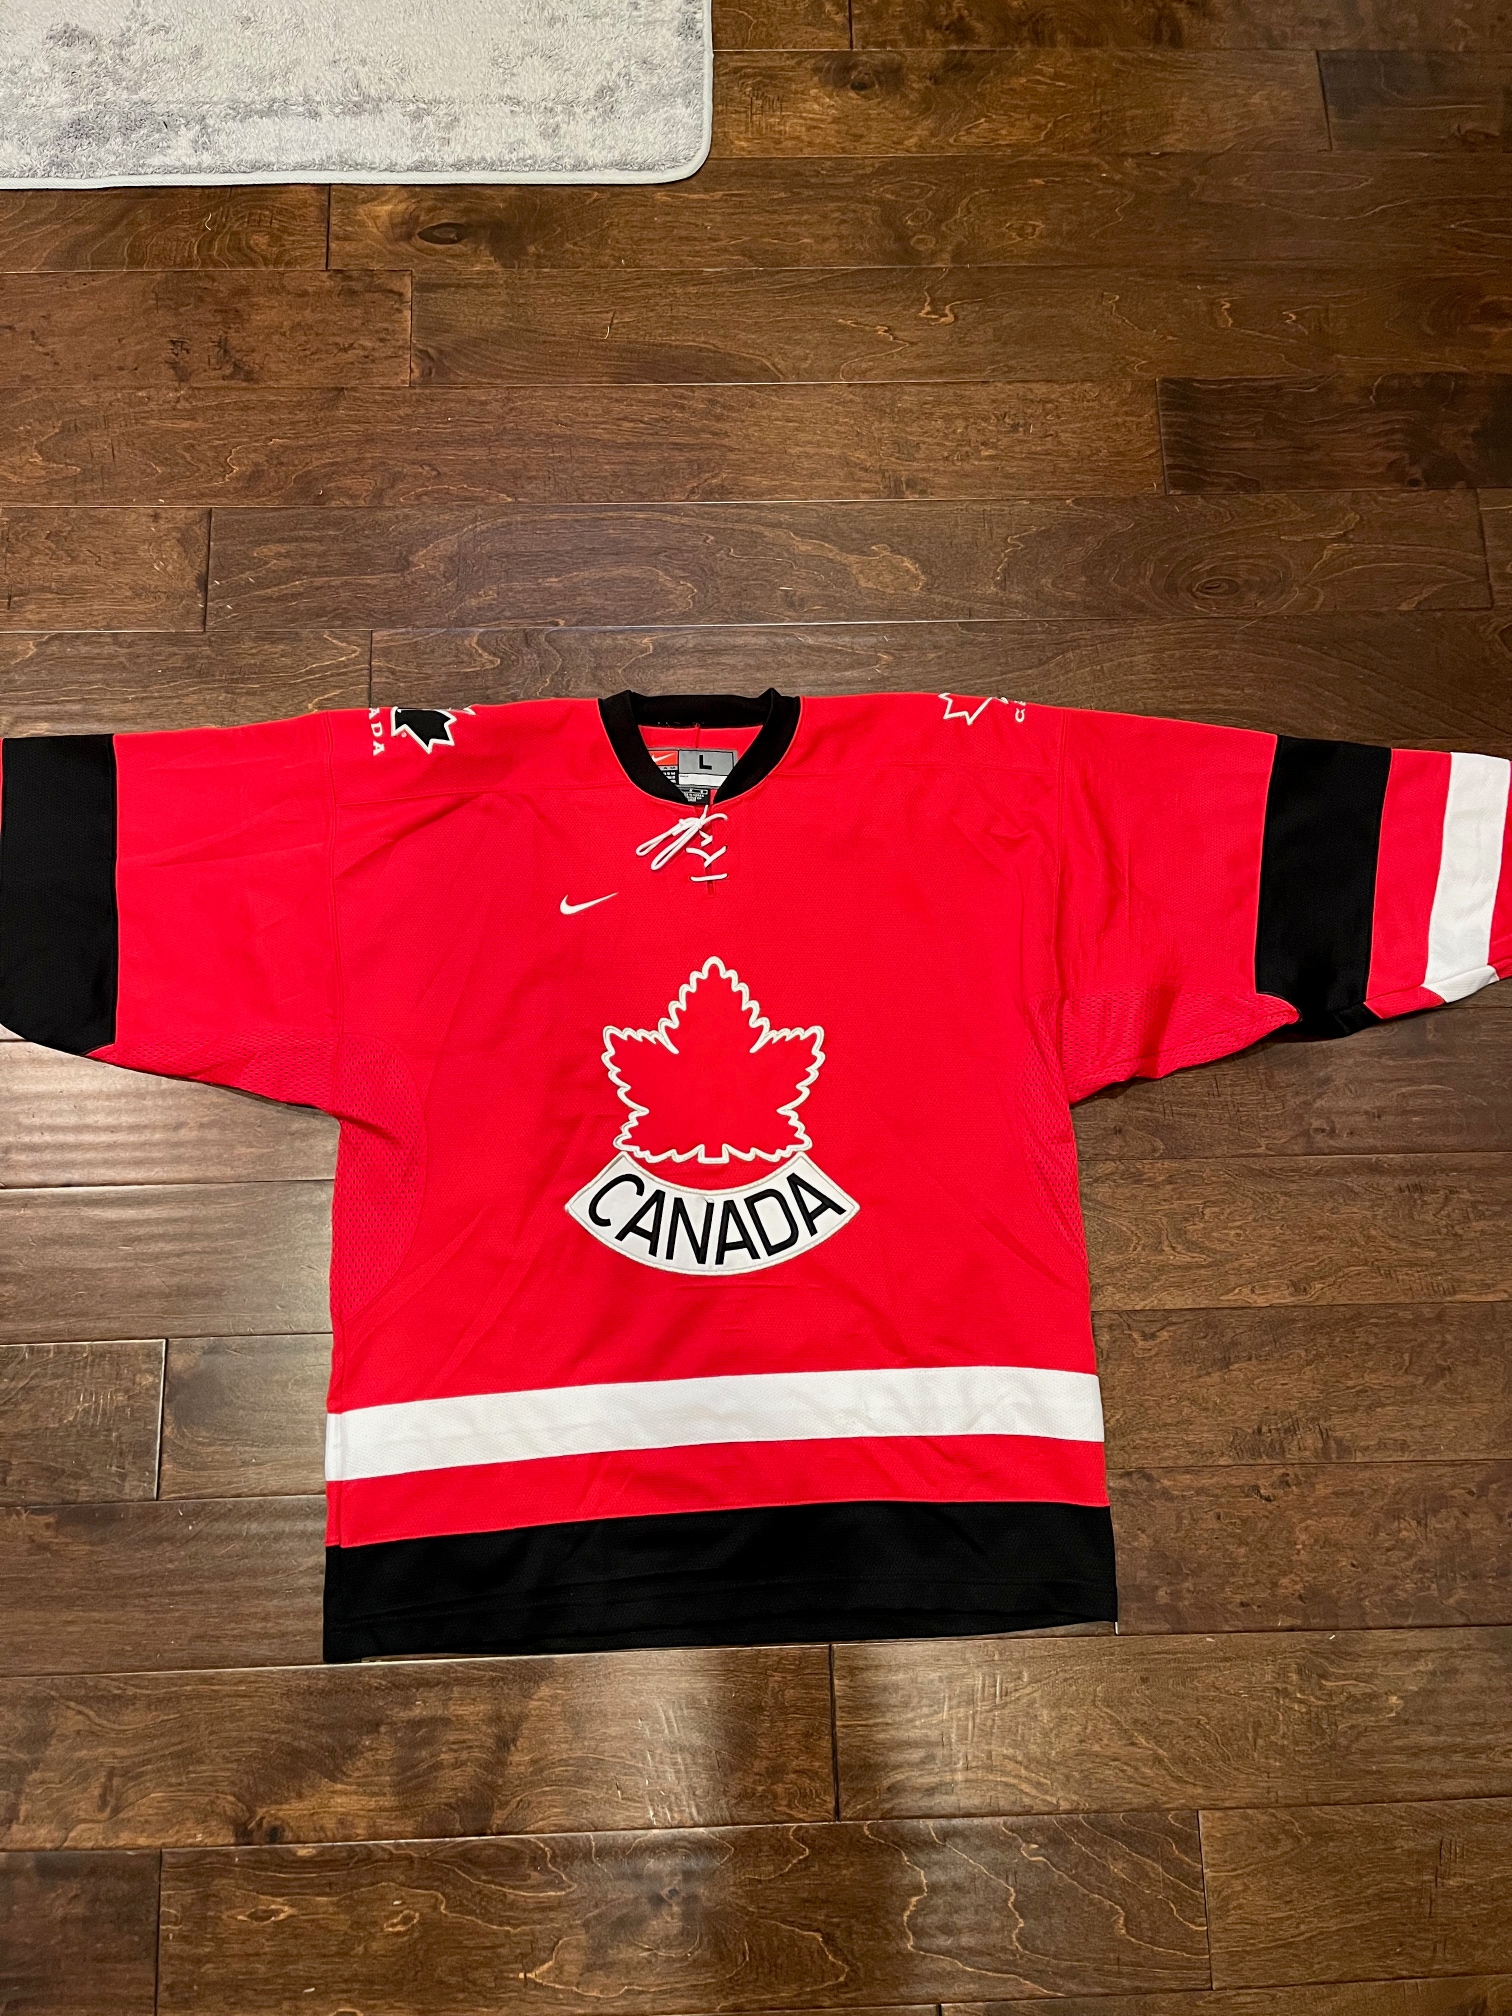 Team Canada - Vintage Nike Hockey Jersey - 2005 - Red - Mens Large